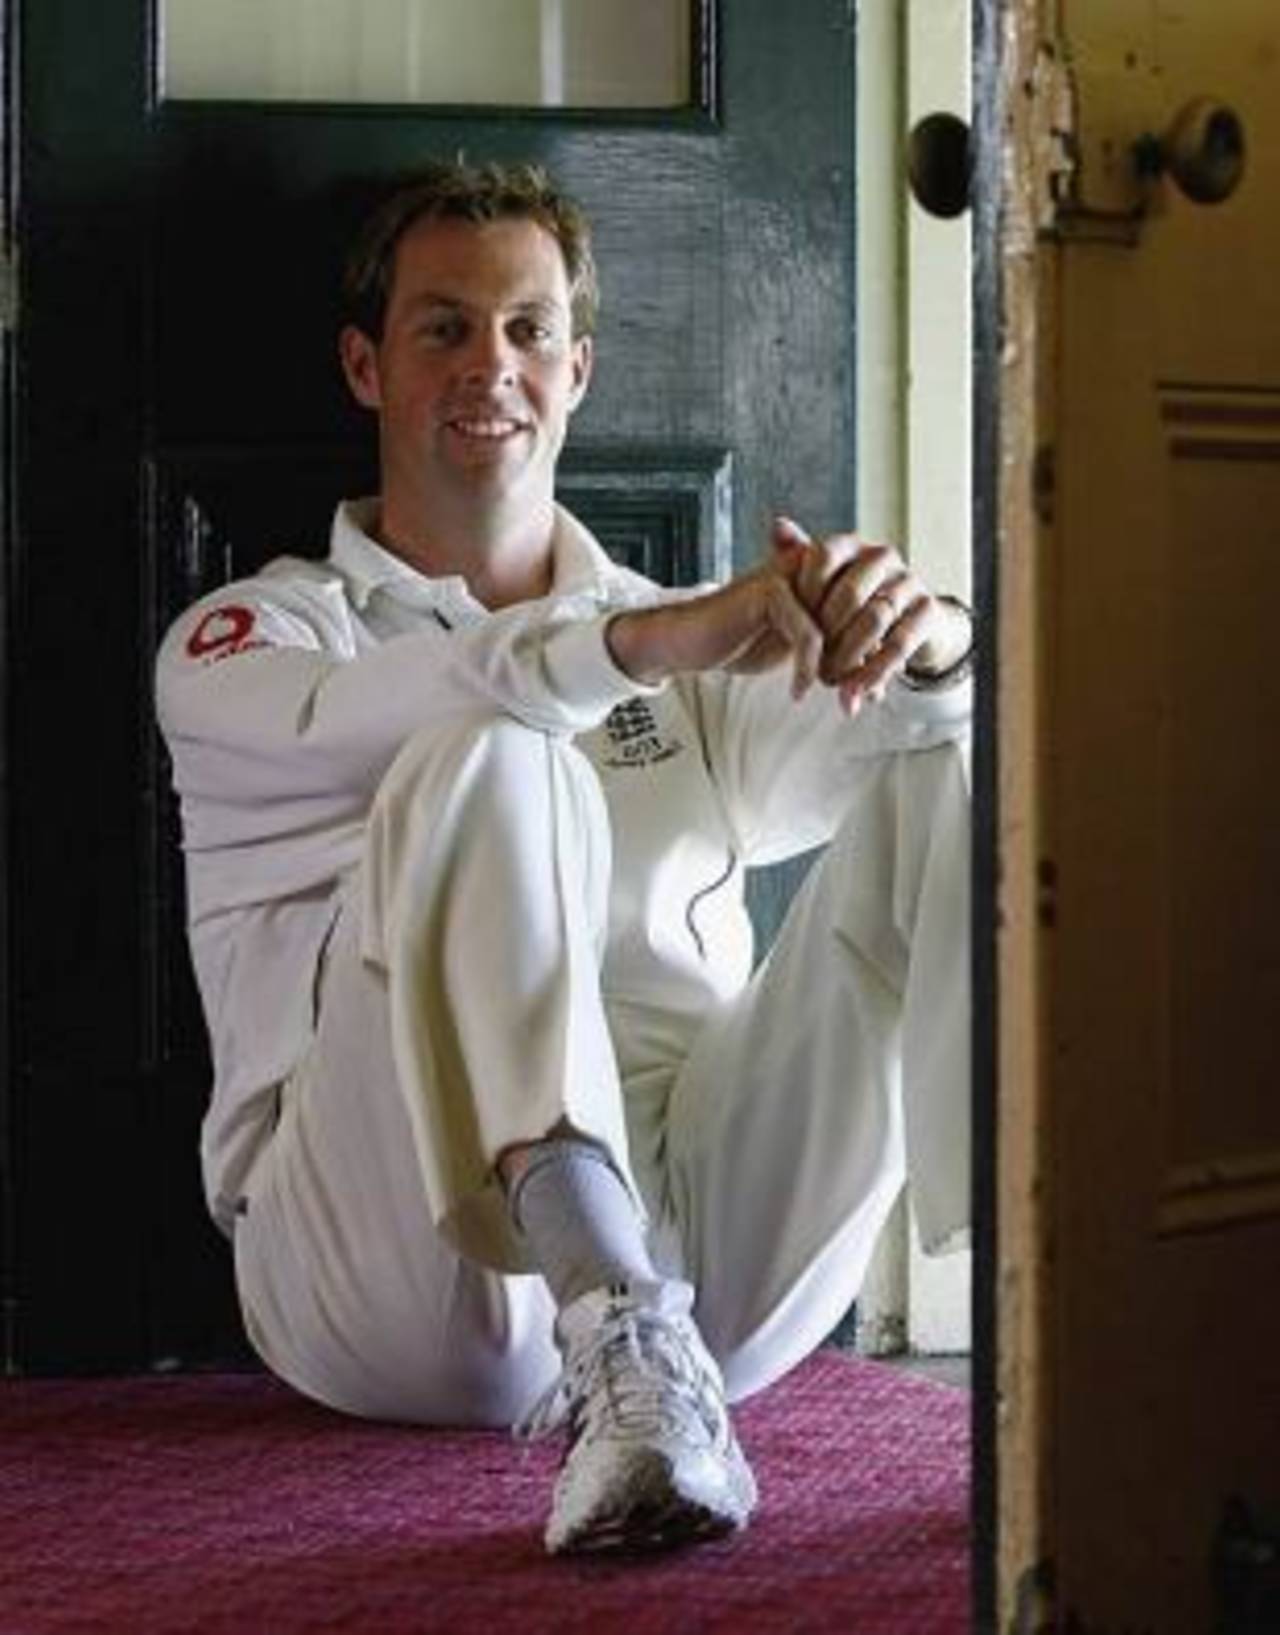 Marcus Trescothick poses for the cameras at the Sydney Cricket Ground, November 5, 2006